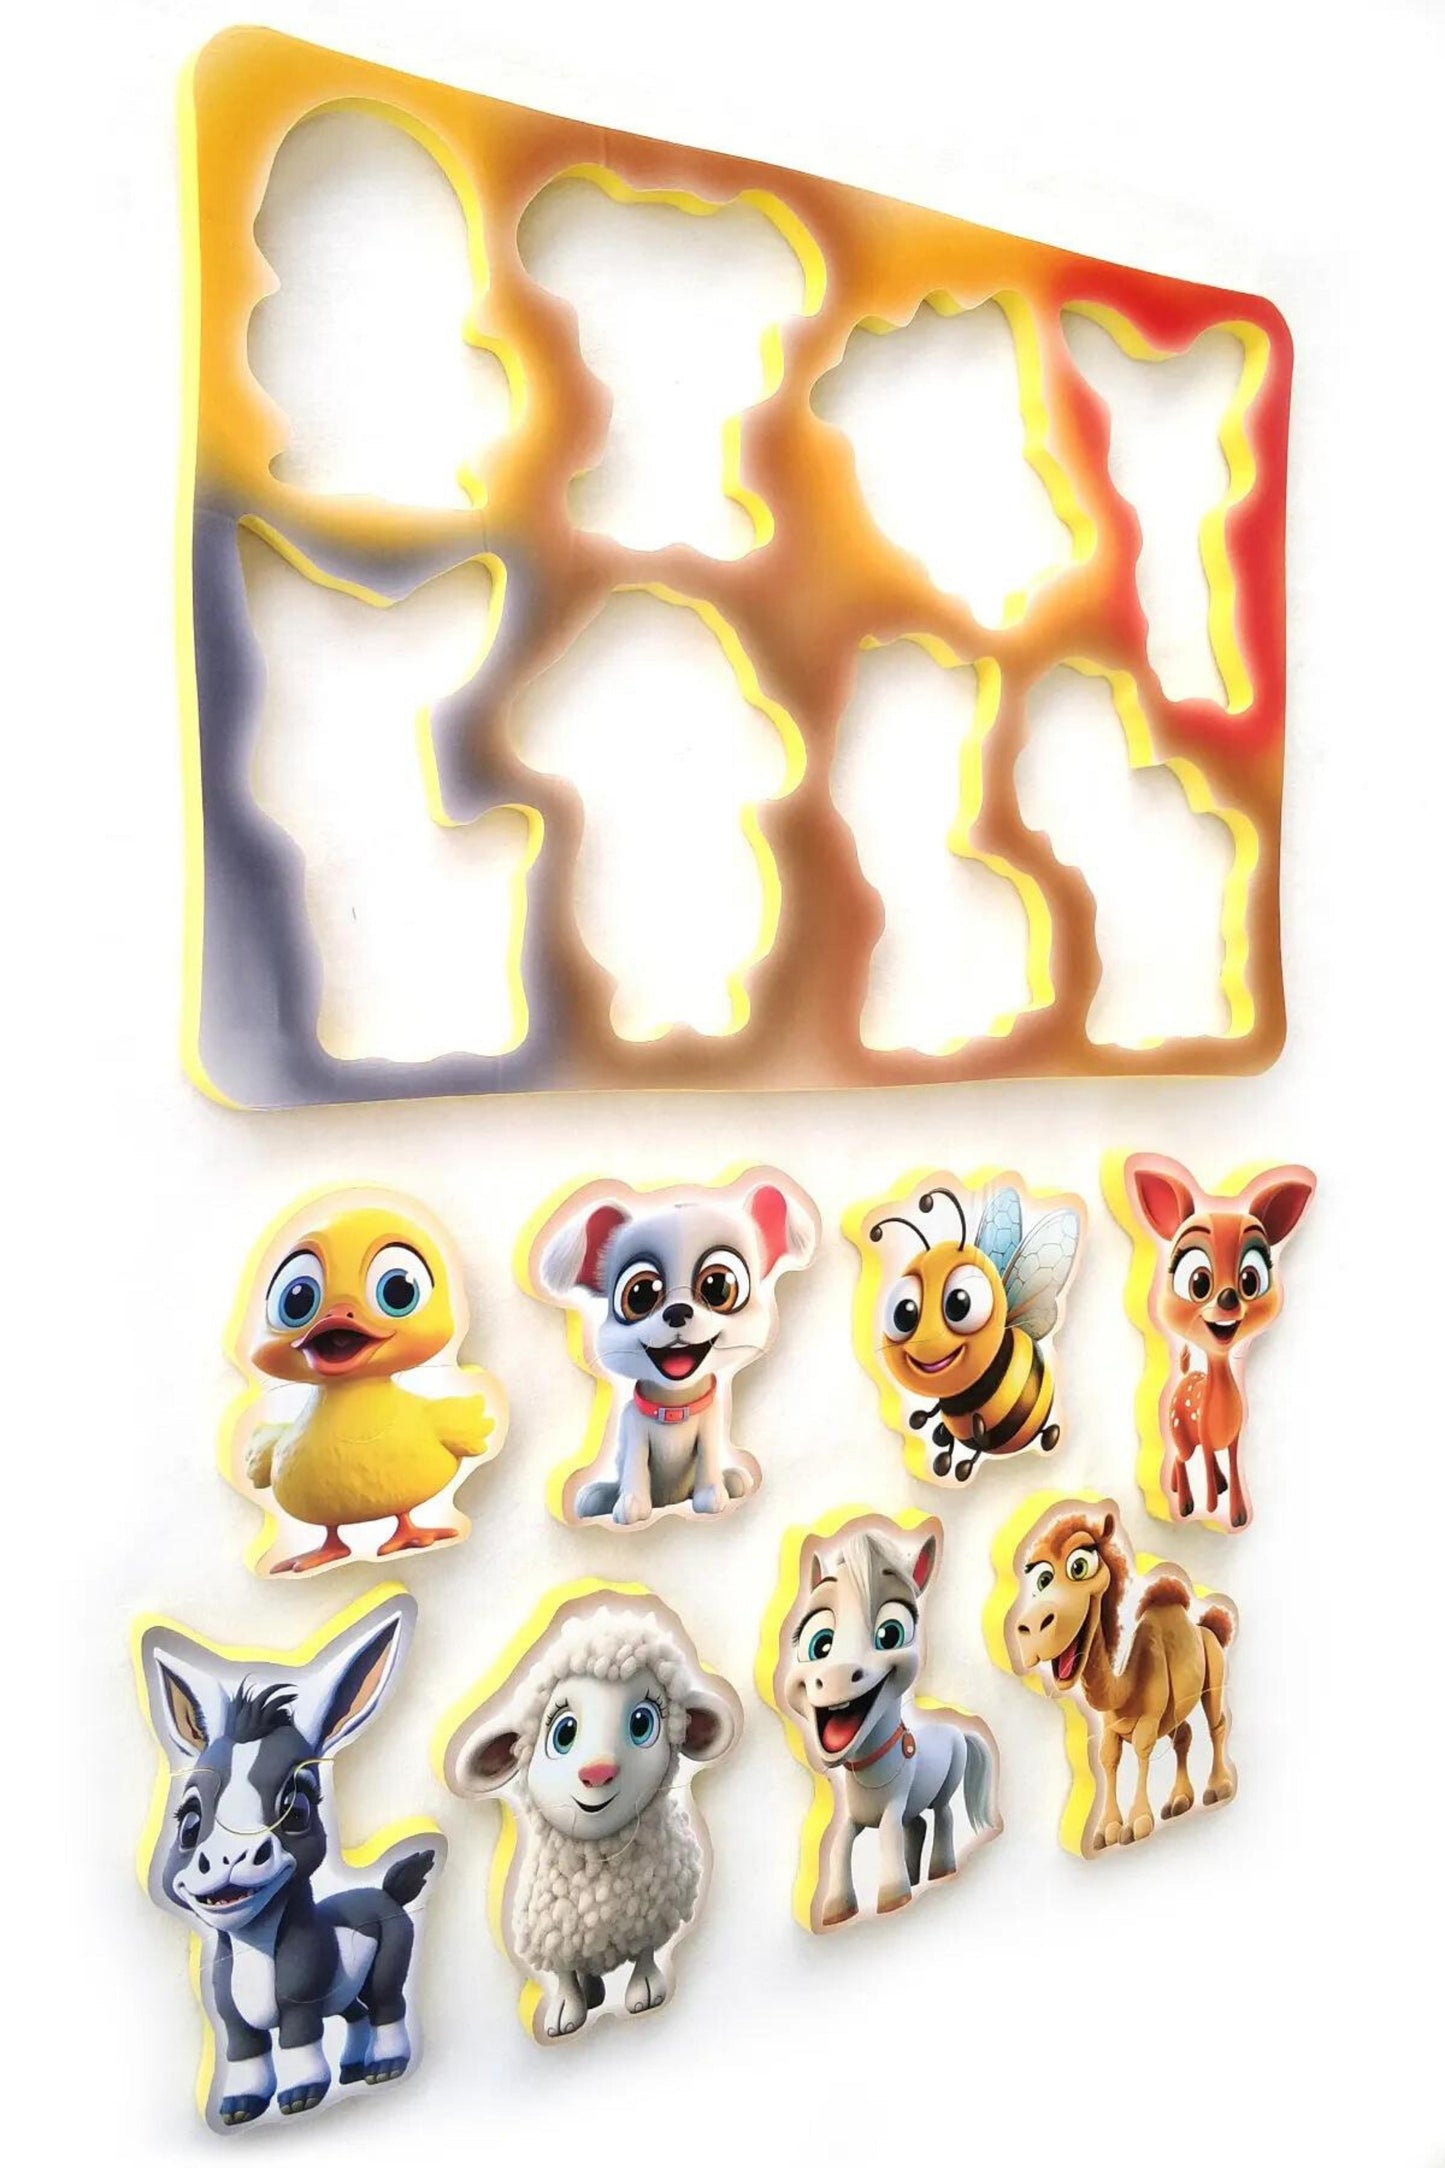 🐮 Baby Puzzle - Farm Animals Series in Soft, Thick, Water-Sticking Sponge 🐷